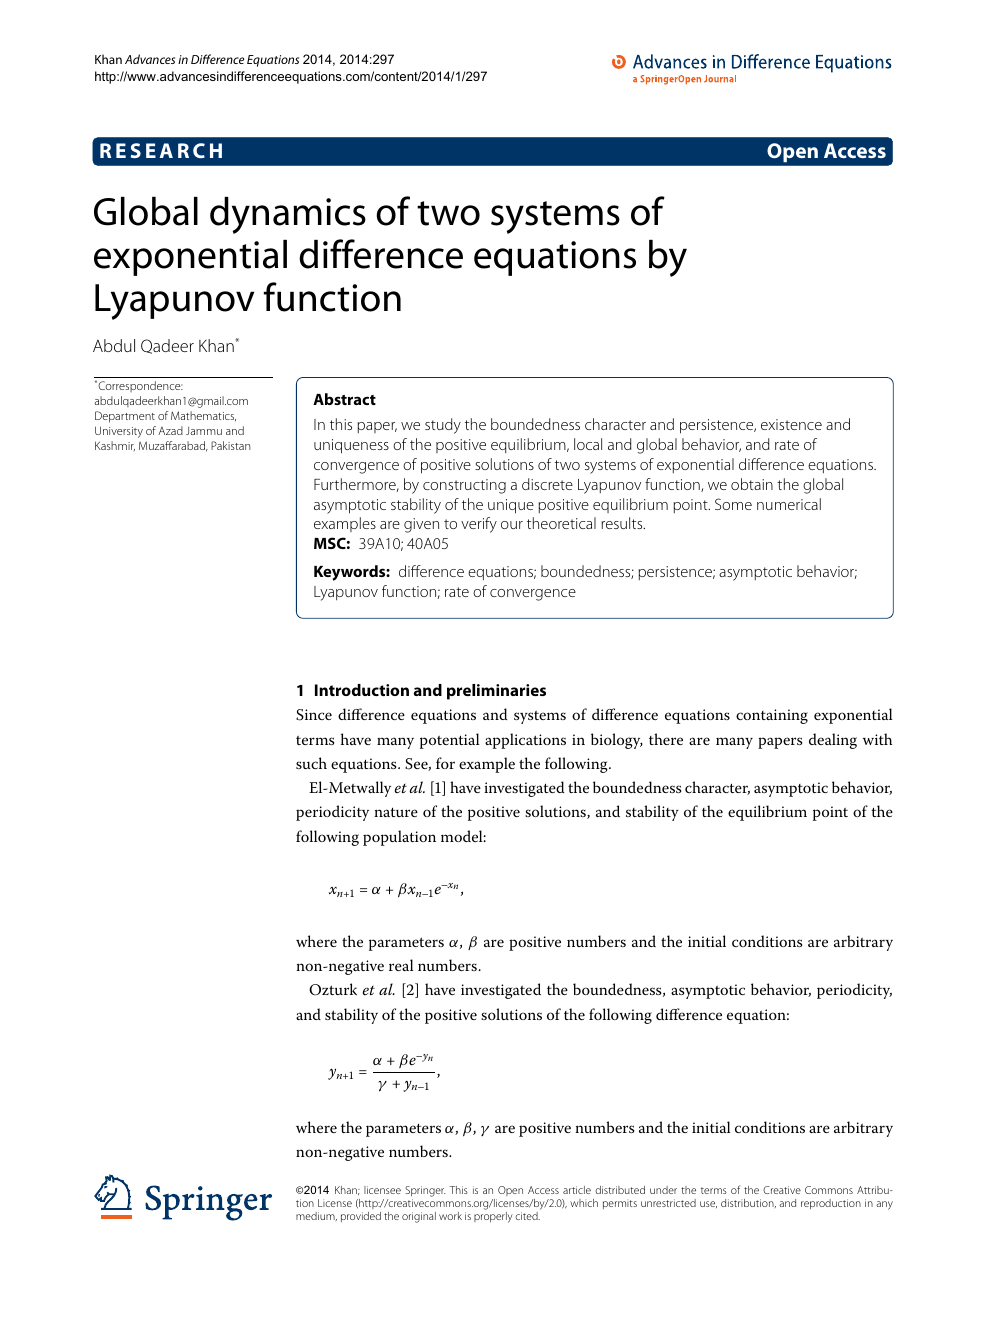 Global Dynamics Of Two Systems Of Exponential Difference Equations By Lyapunov Function Topic Of Research Paper In Mathematics Download Scholarly Article Pdf And Read For Free On Cyberleninka Open Science Hub